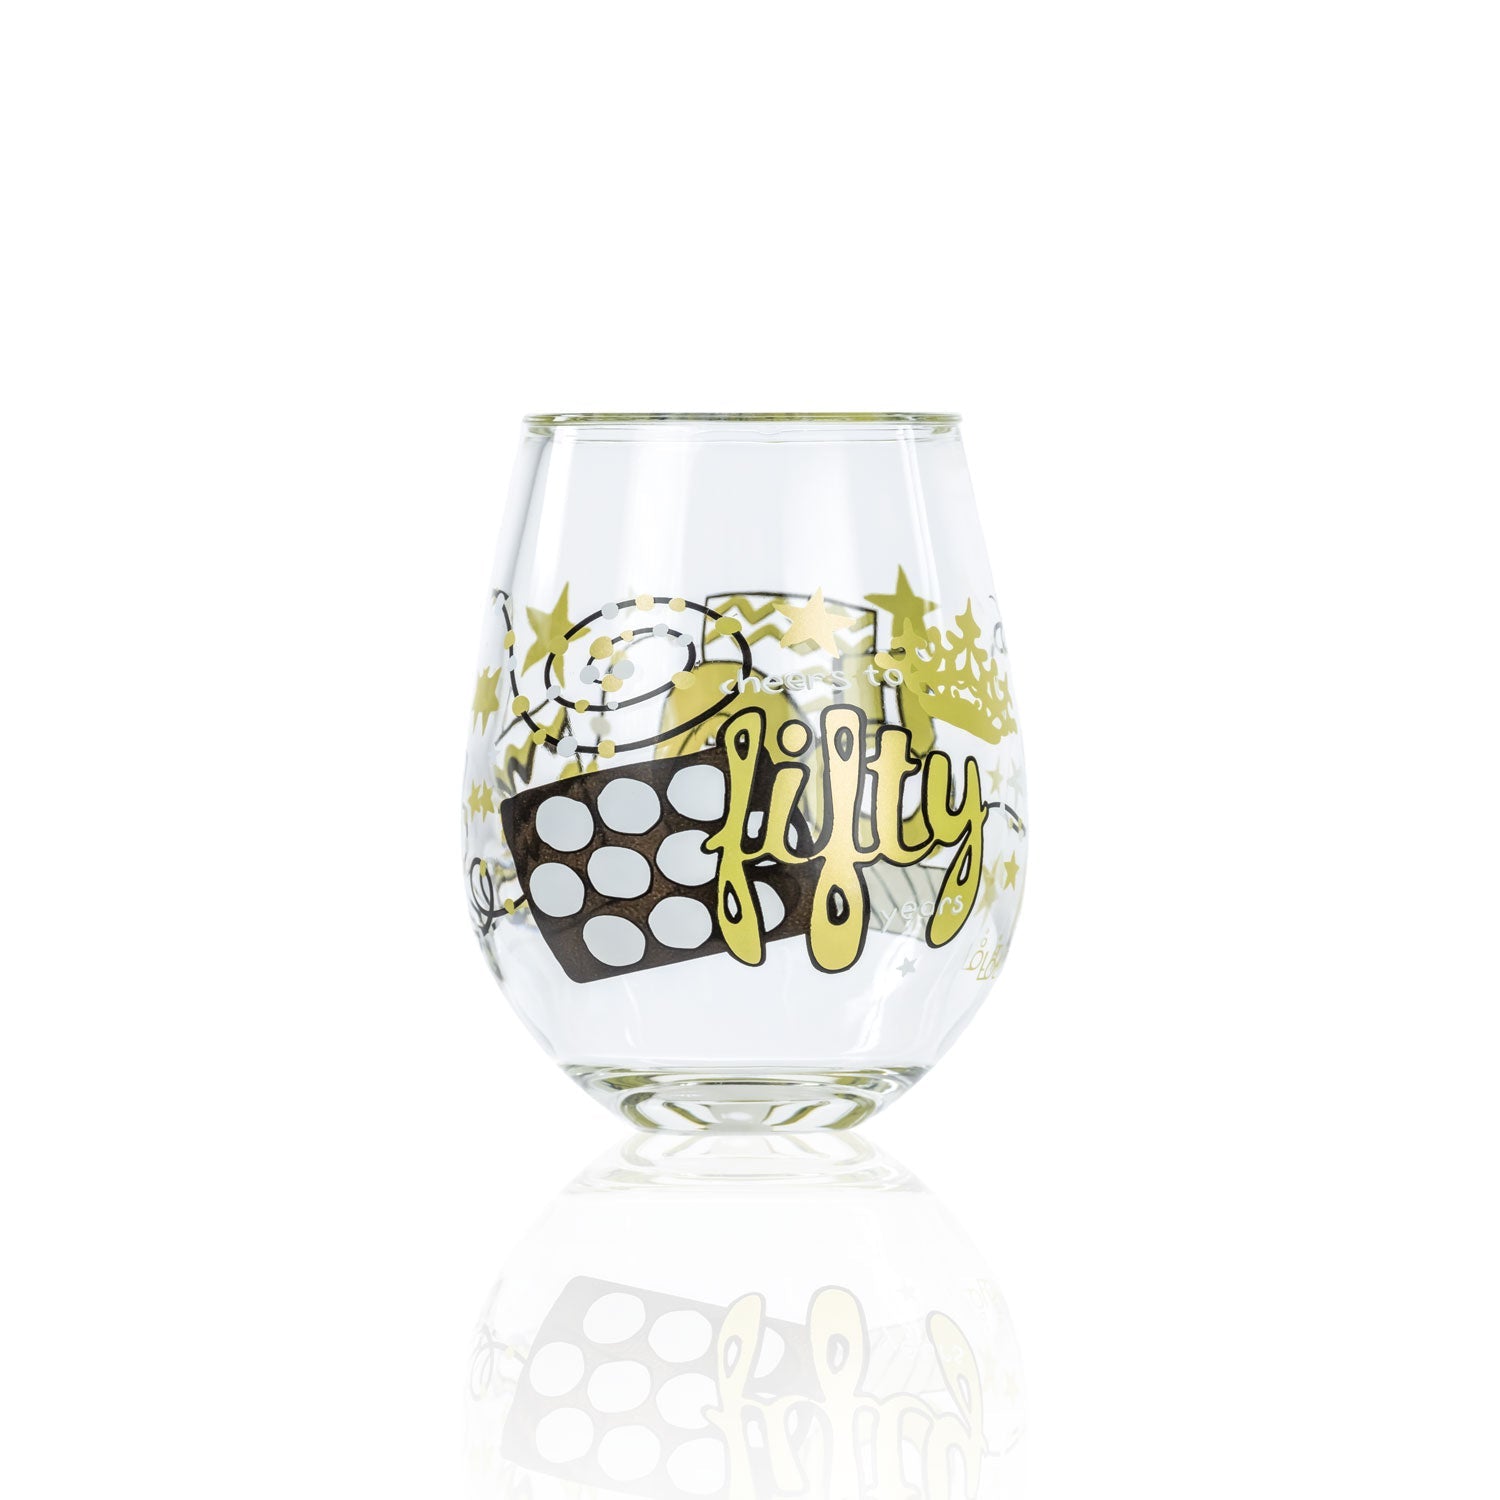 Party To Go by Lolita 50 years 15oz Acrylic Stemless Wine Glasses